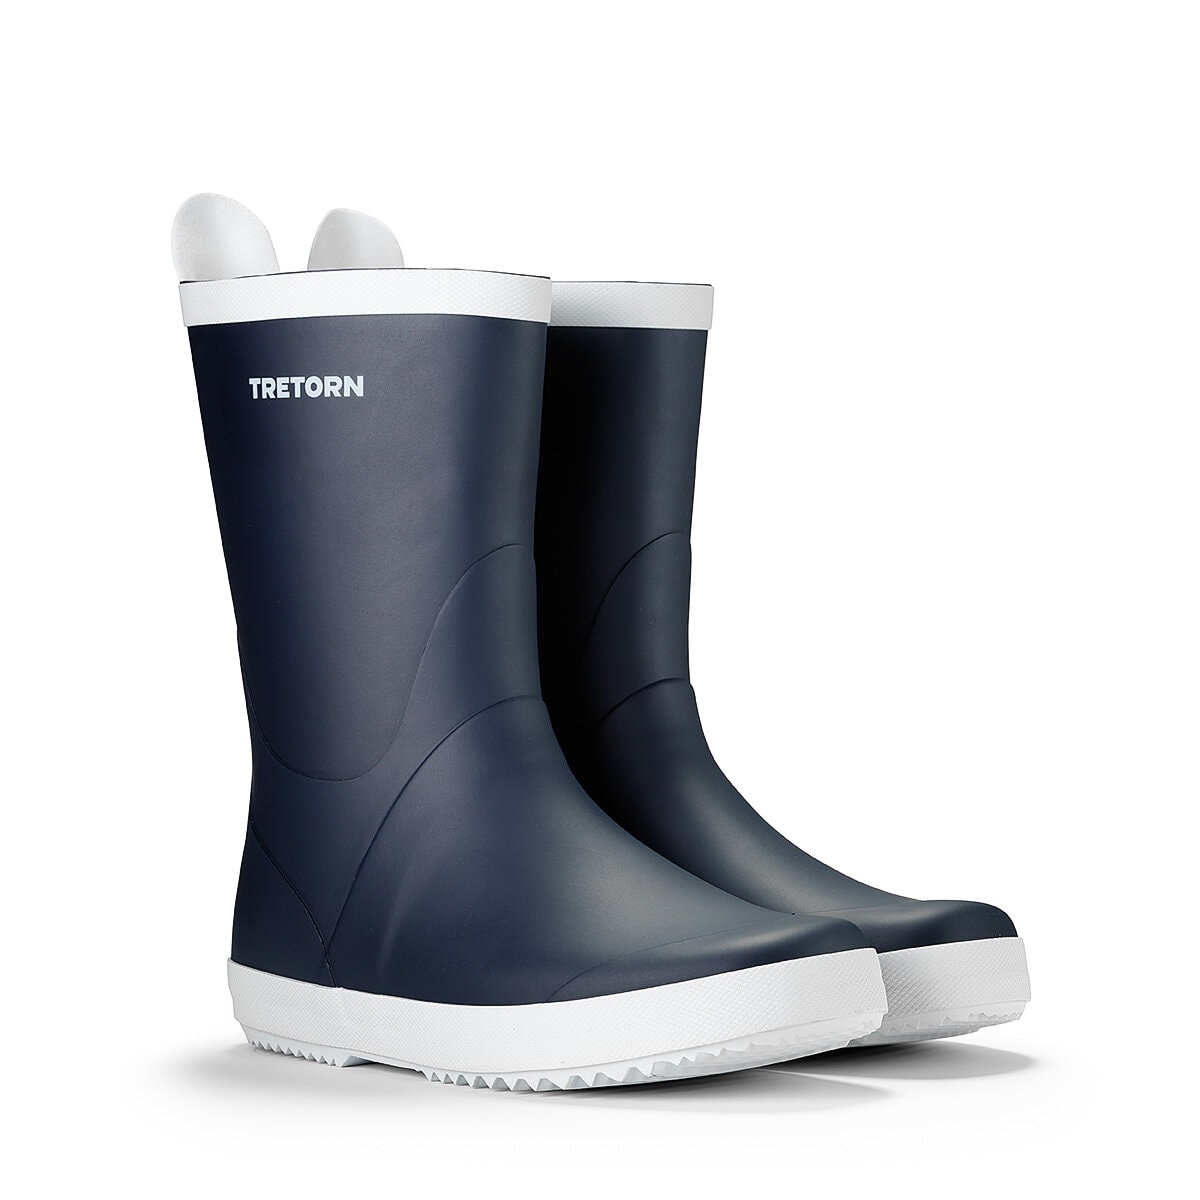 Wings rubber boots by Tretorn for men and women in the colour blue